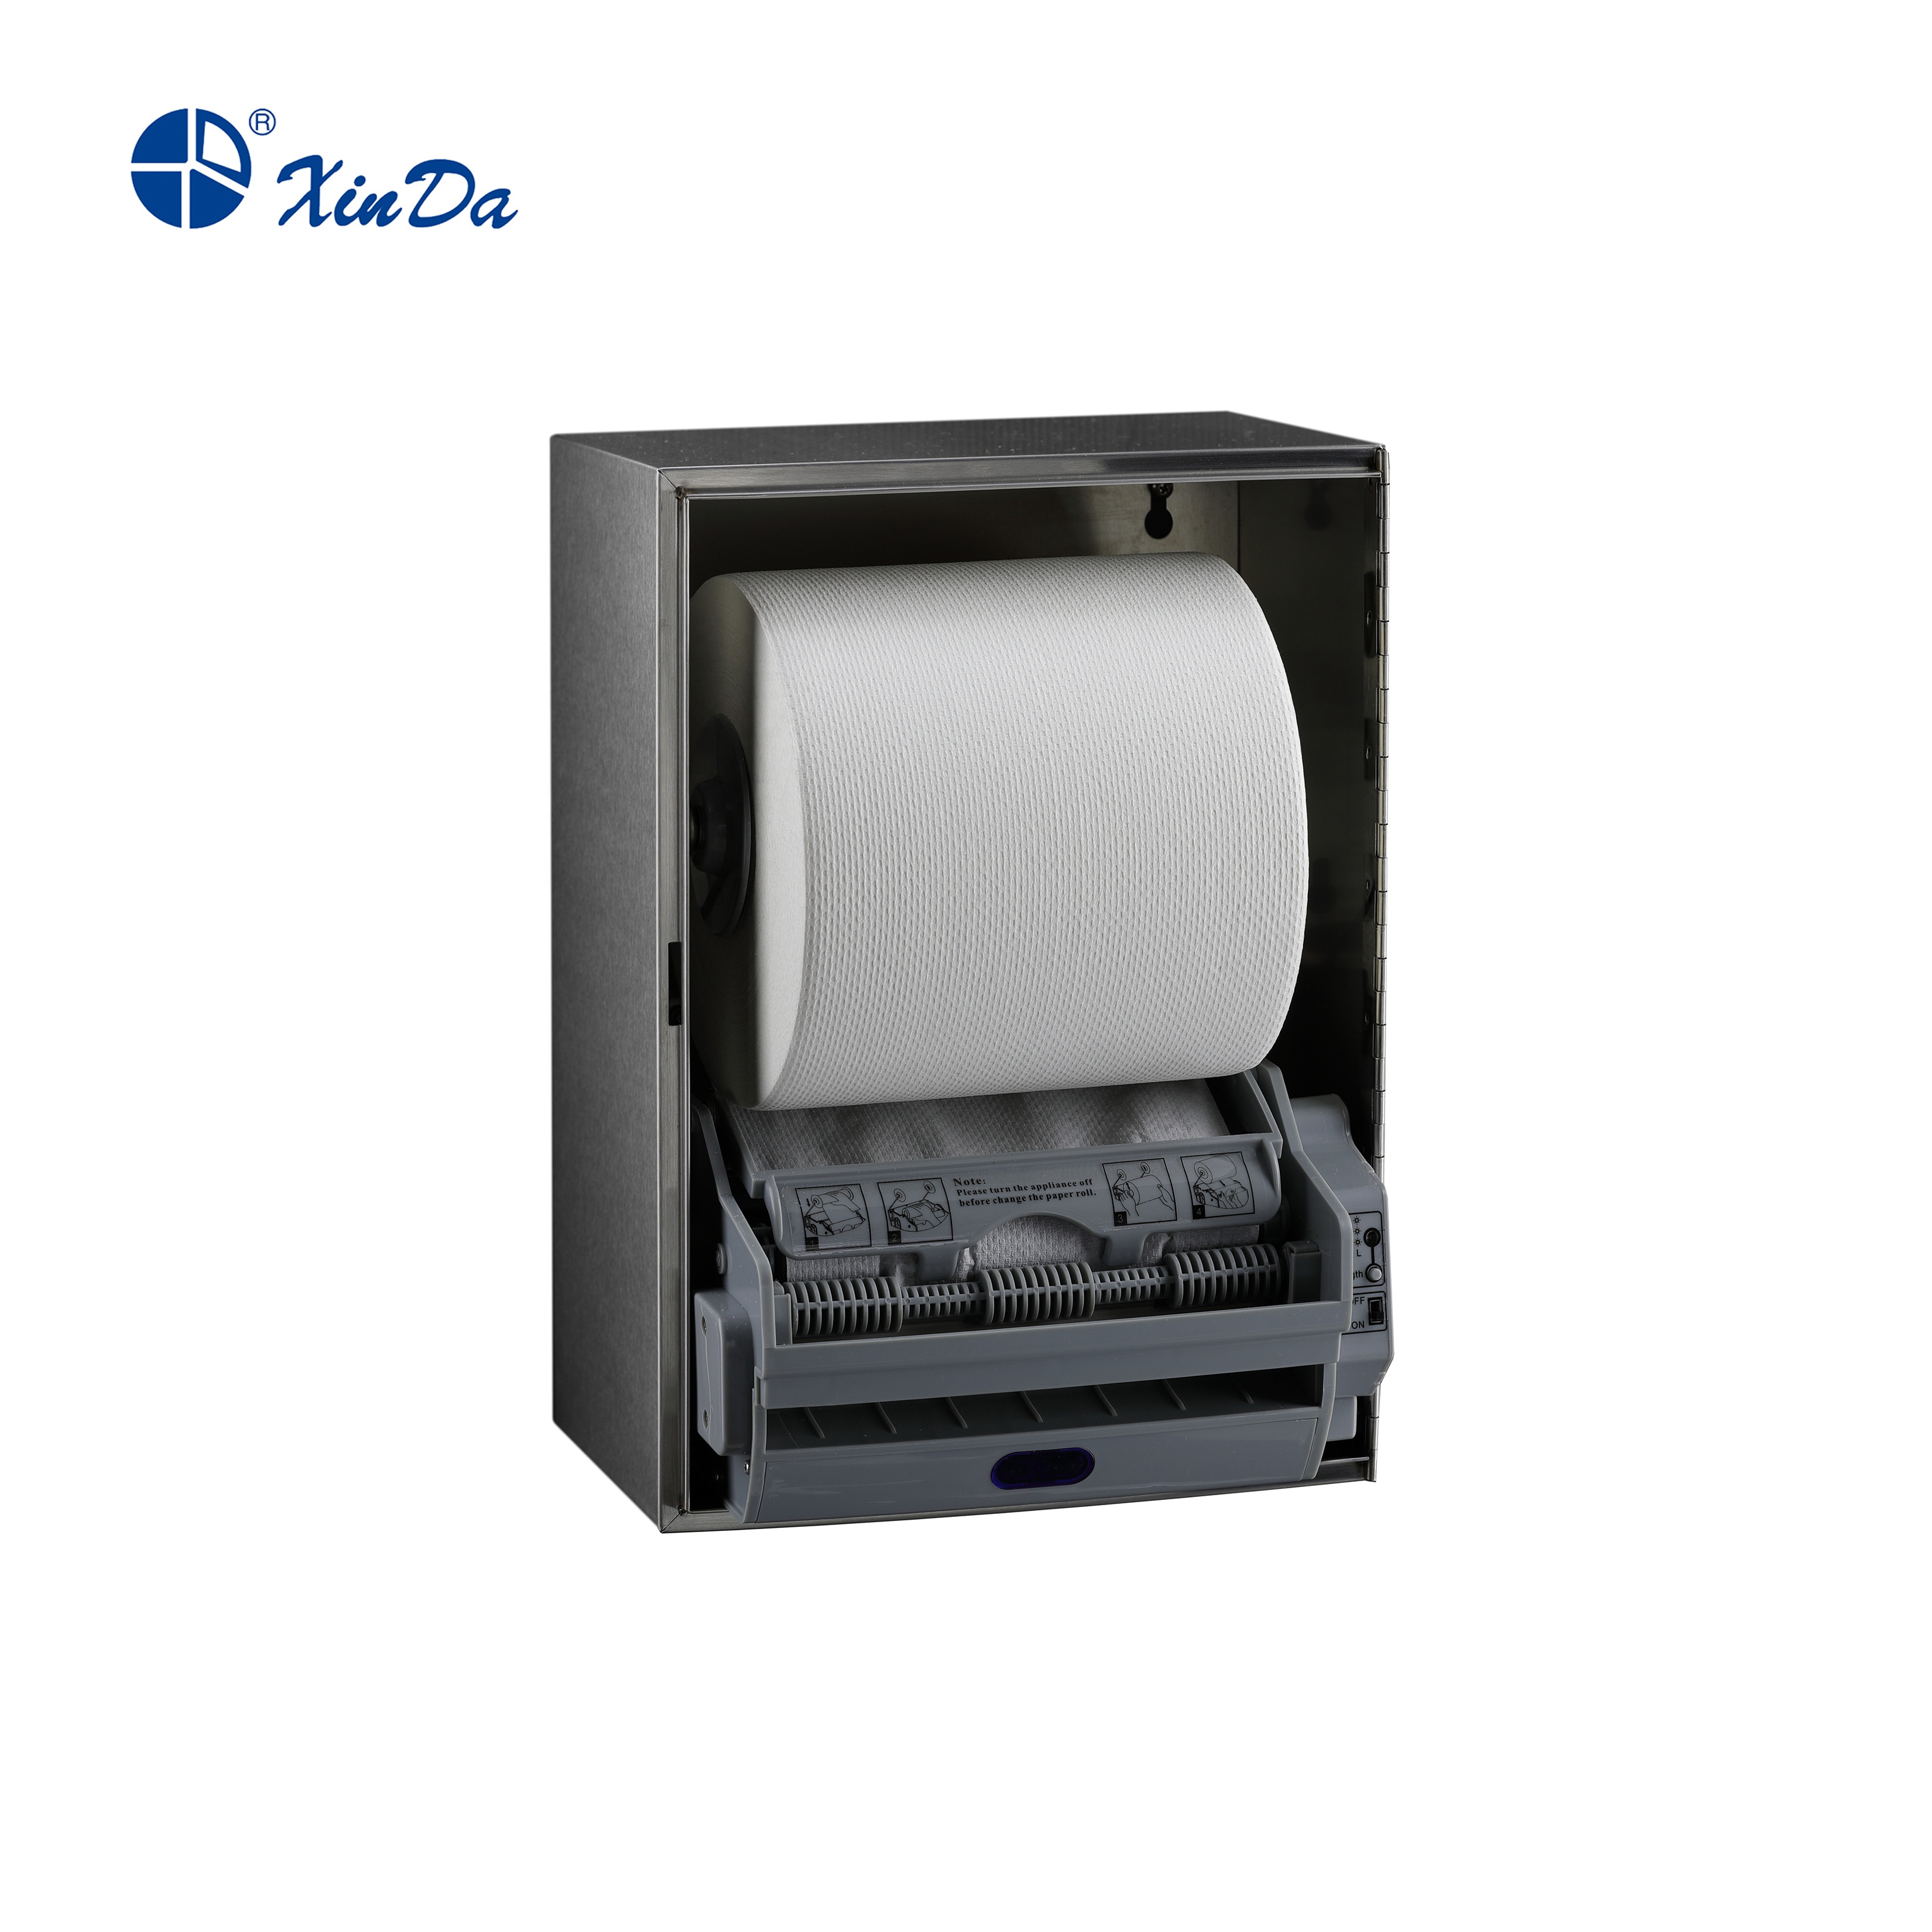 XINDA CZQ20K Automatic Stainless Steel Roll Paper Towel Dispenser